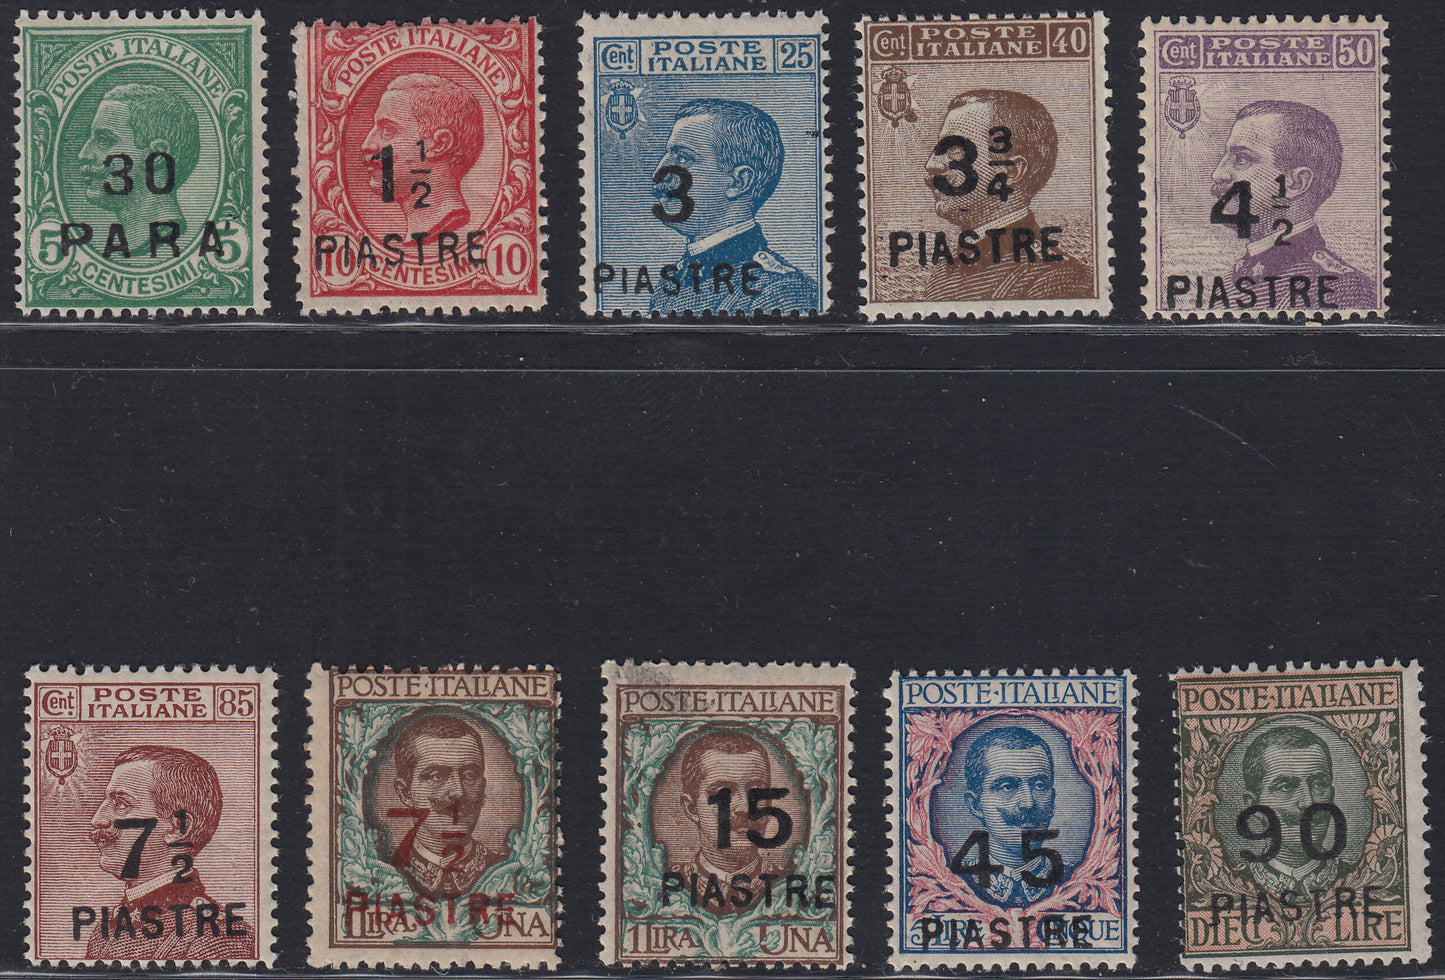 LevCost55 - Post Offices Abroad, issues for each office in Europe and Asia, Constantinople 8th new local issue intact (58/67)